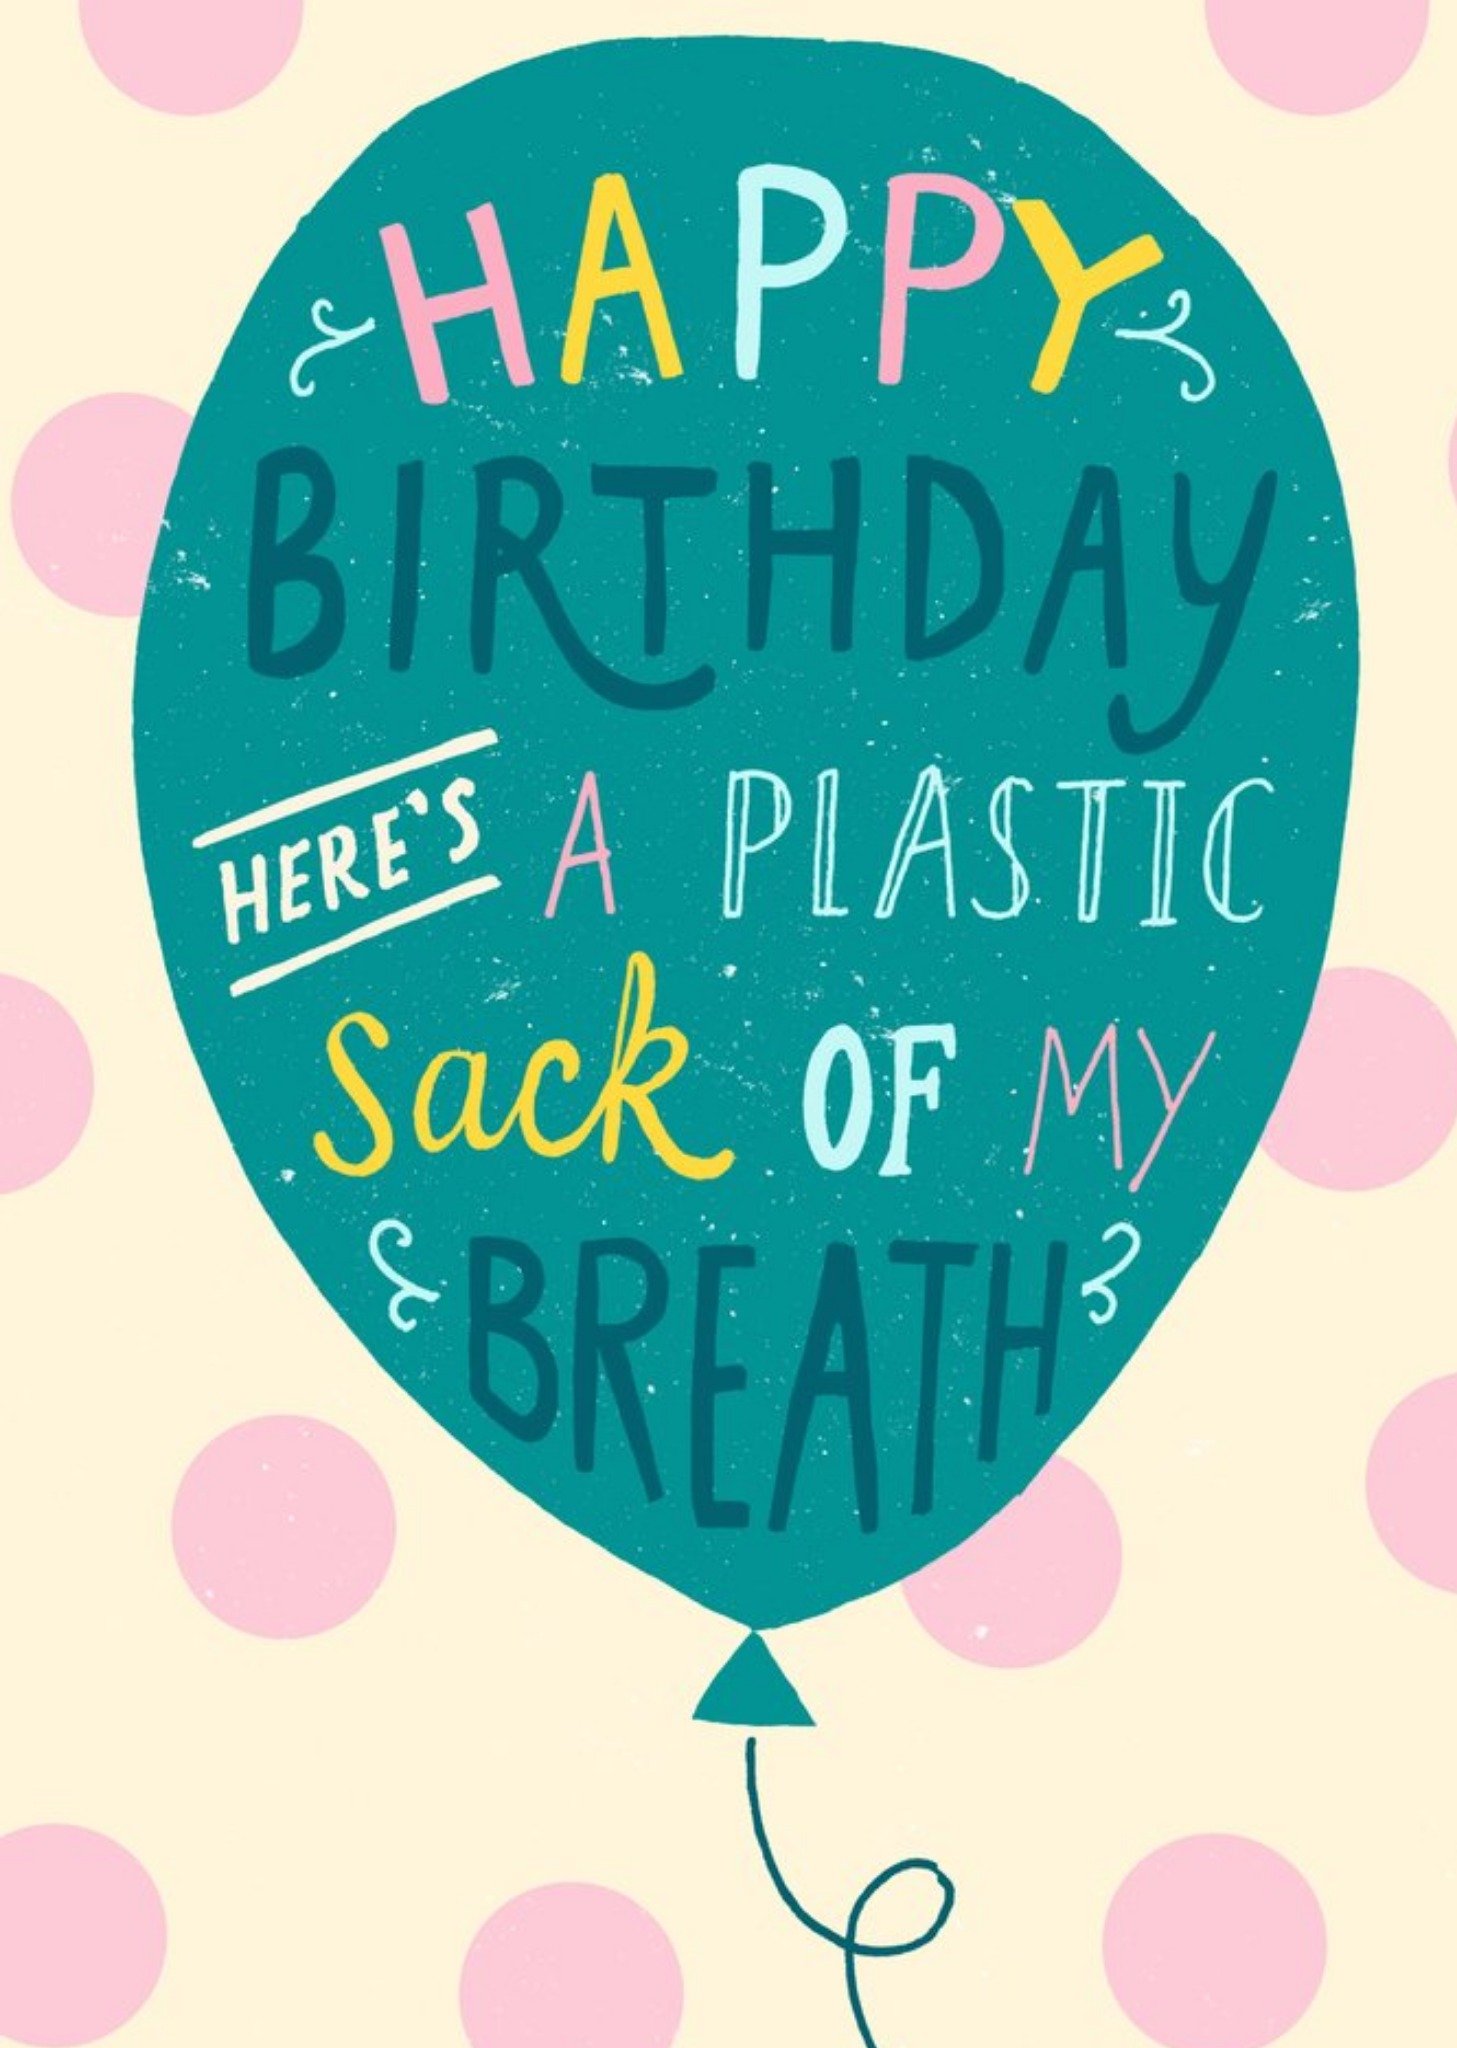 Moonpig Funny Happy Birthday Heres A Plastic Sack Of My Breath Card, Large